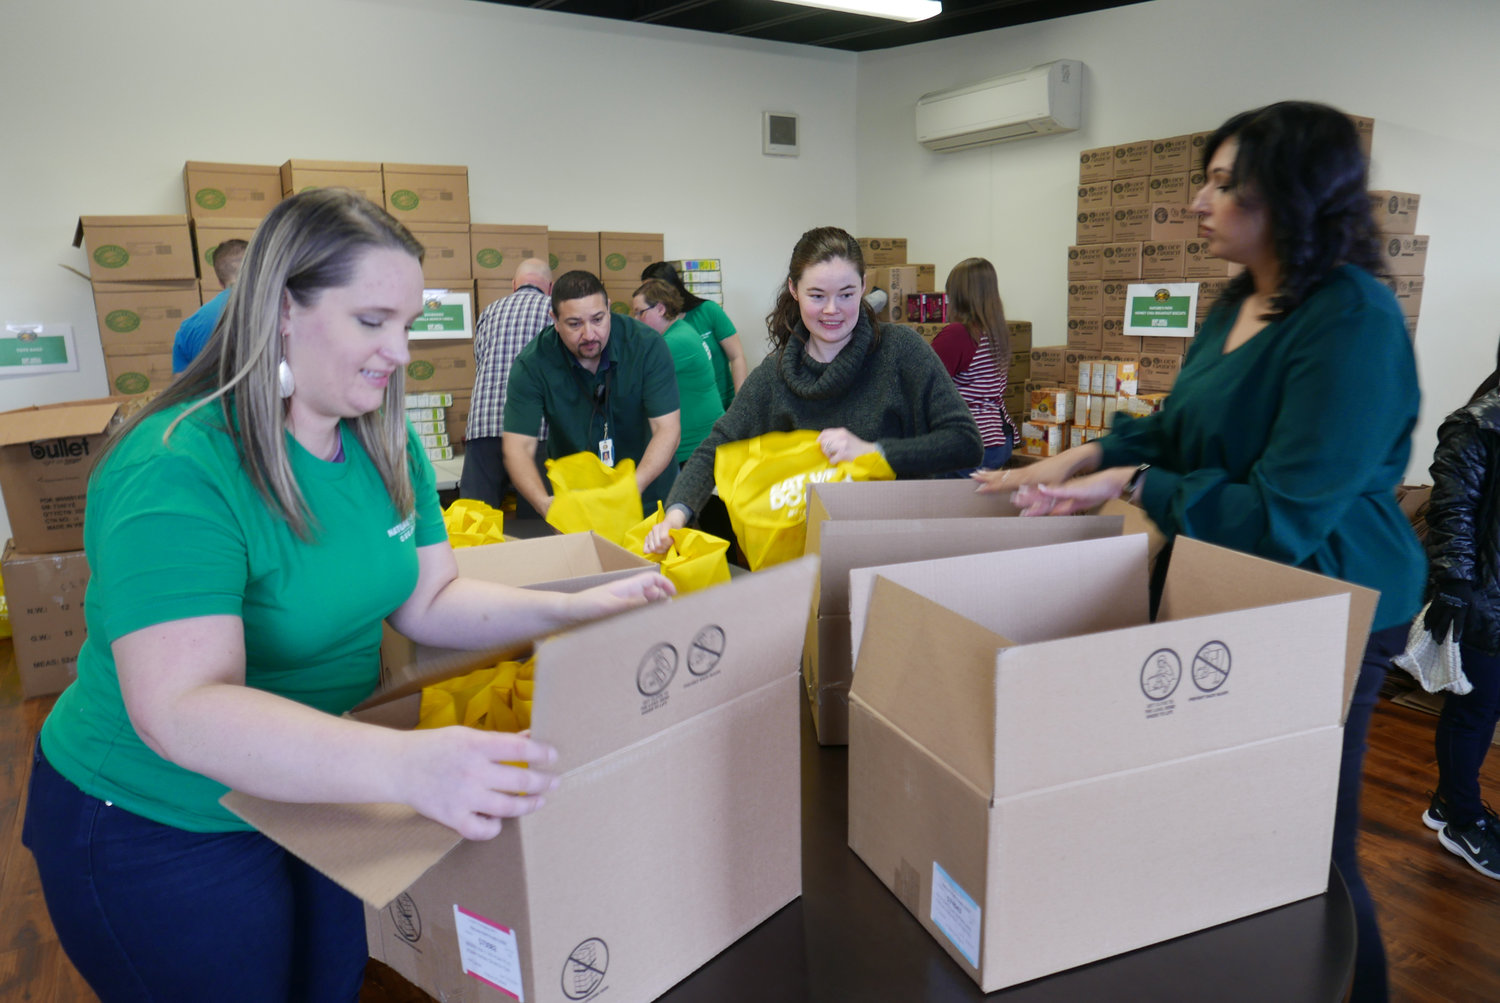 Employees at Nature’s Path in Blaine recently packed boxes with breakfast bars, biscuits, cereal and oatmeal for food-insecure middle schoolers in the Ferndale School District.